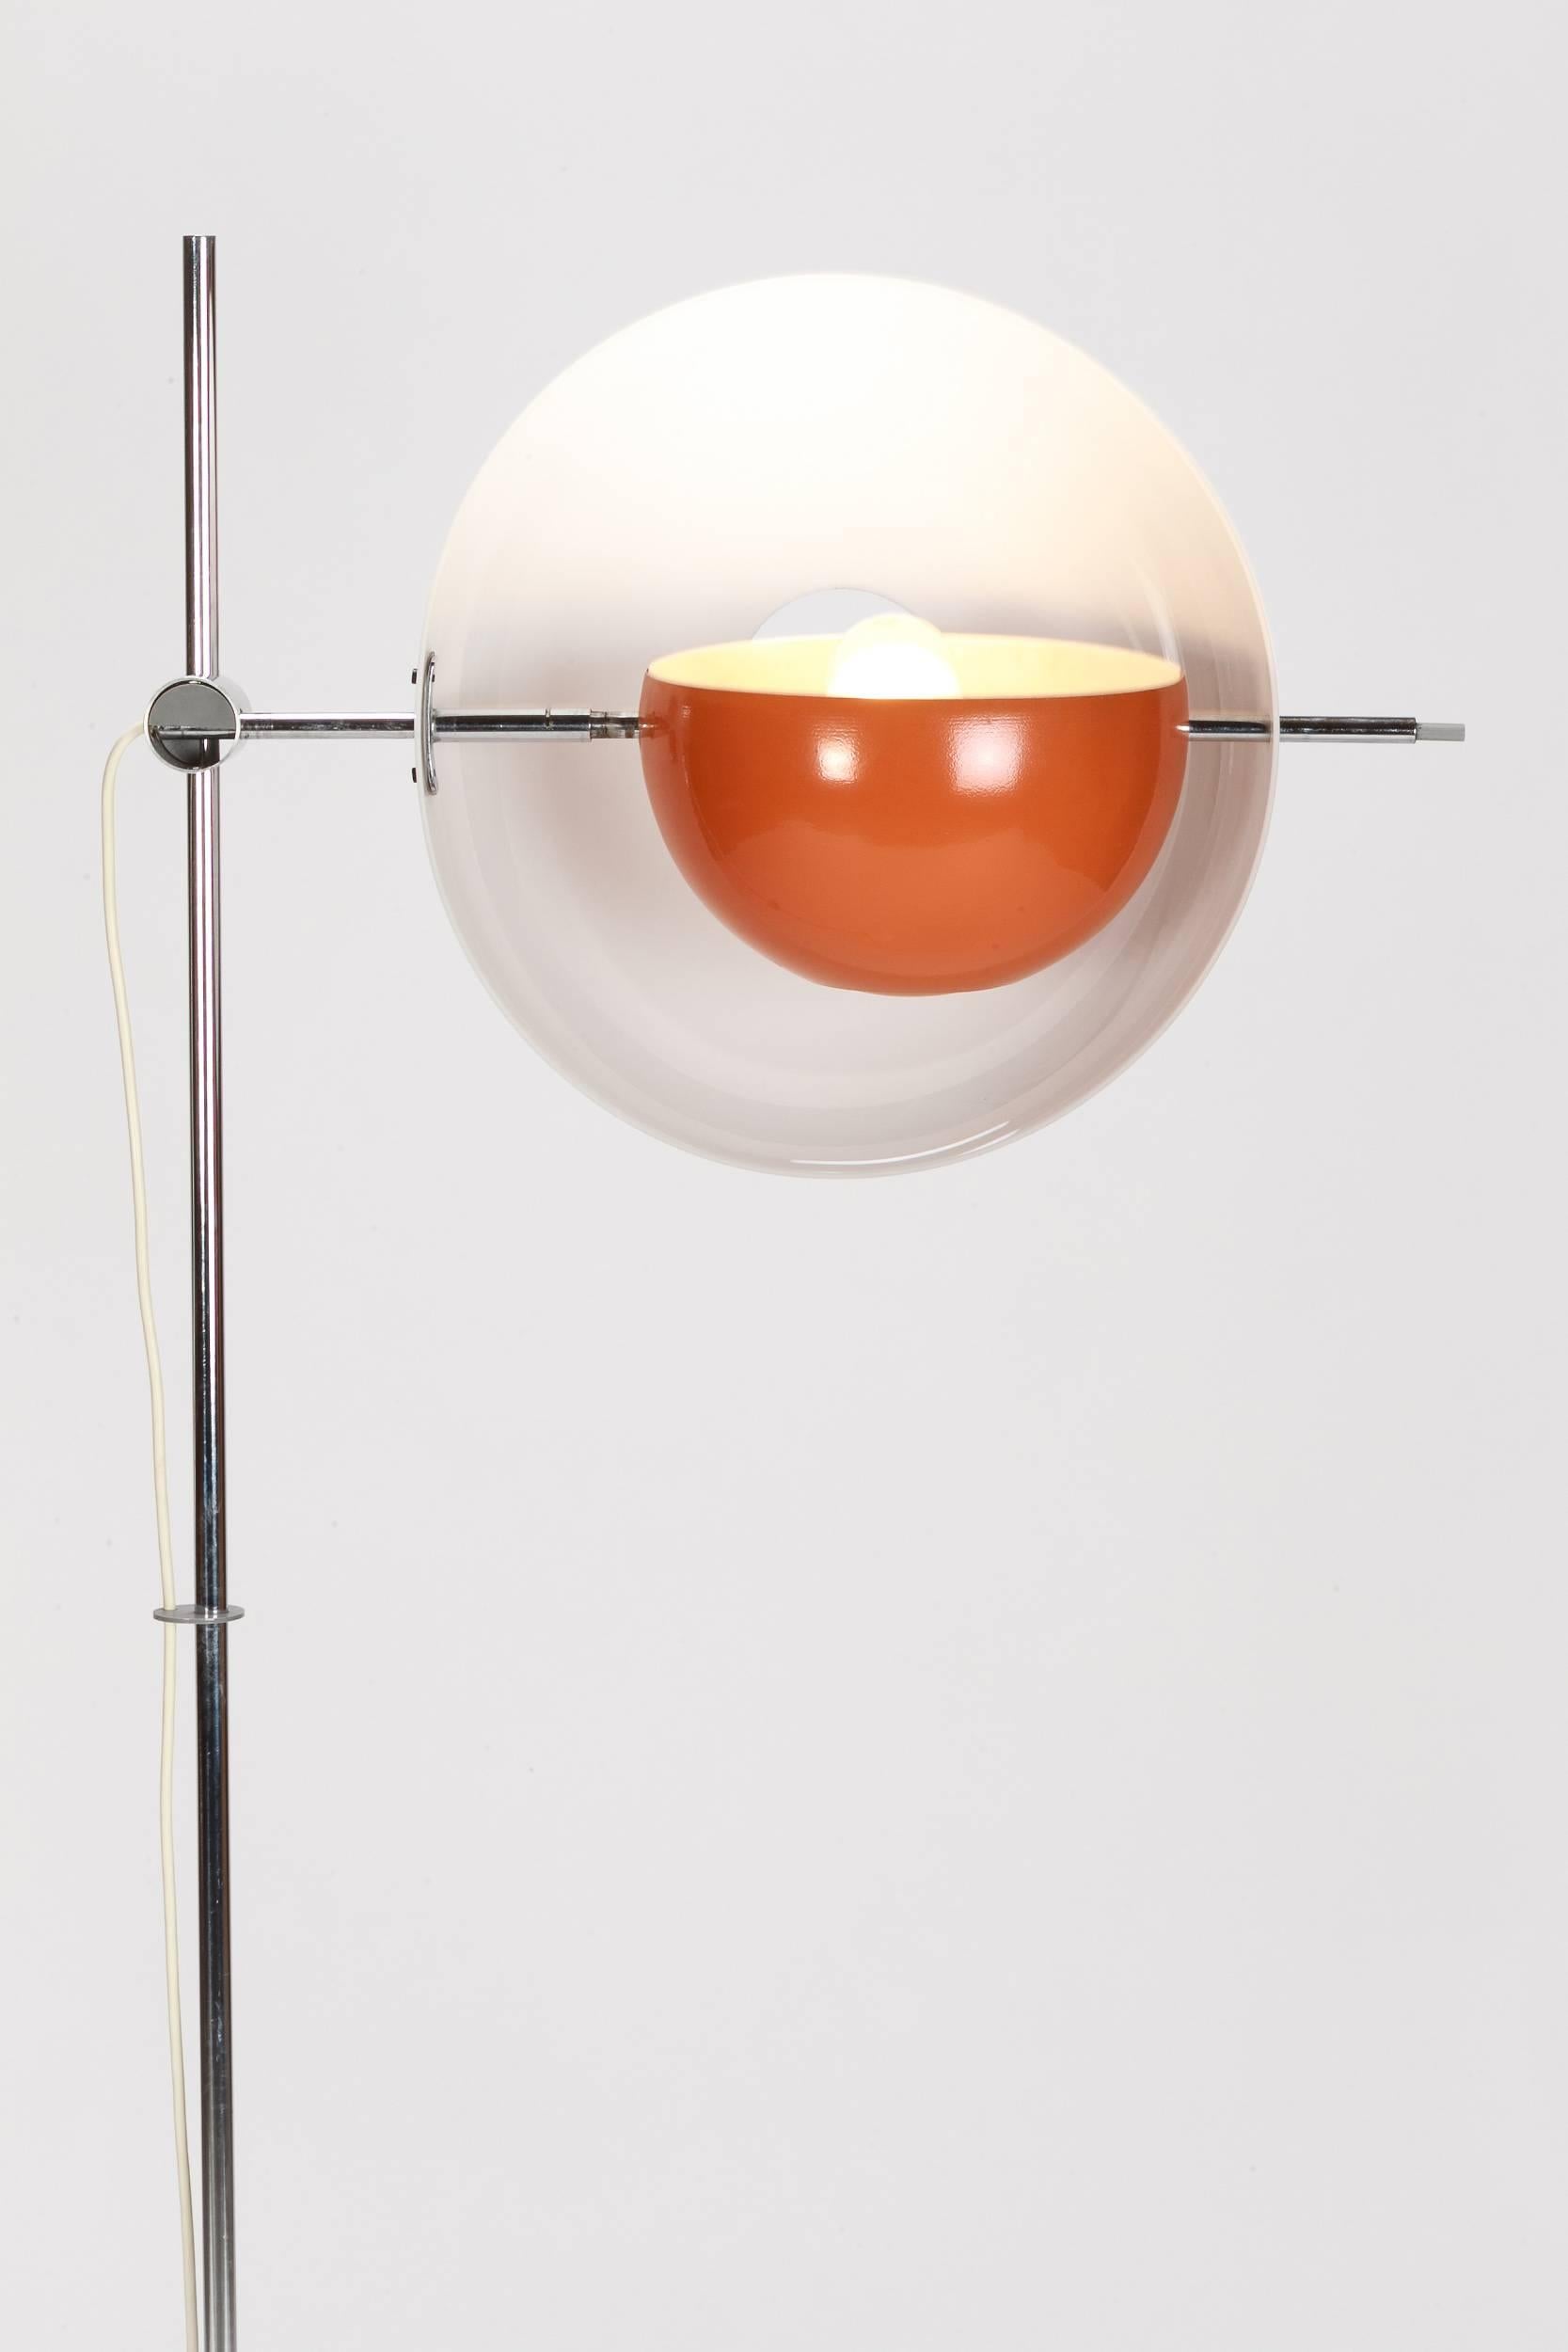 Lacquered Swiss Floor Lamp, Type 300, by Rico & Rosemarie Baltensweiler, 1971